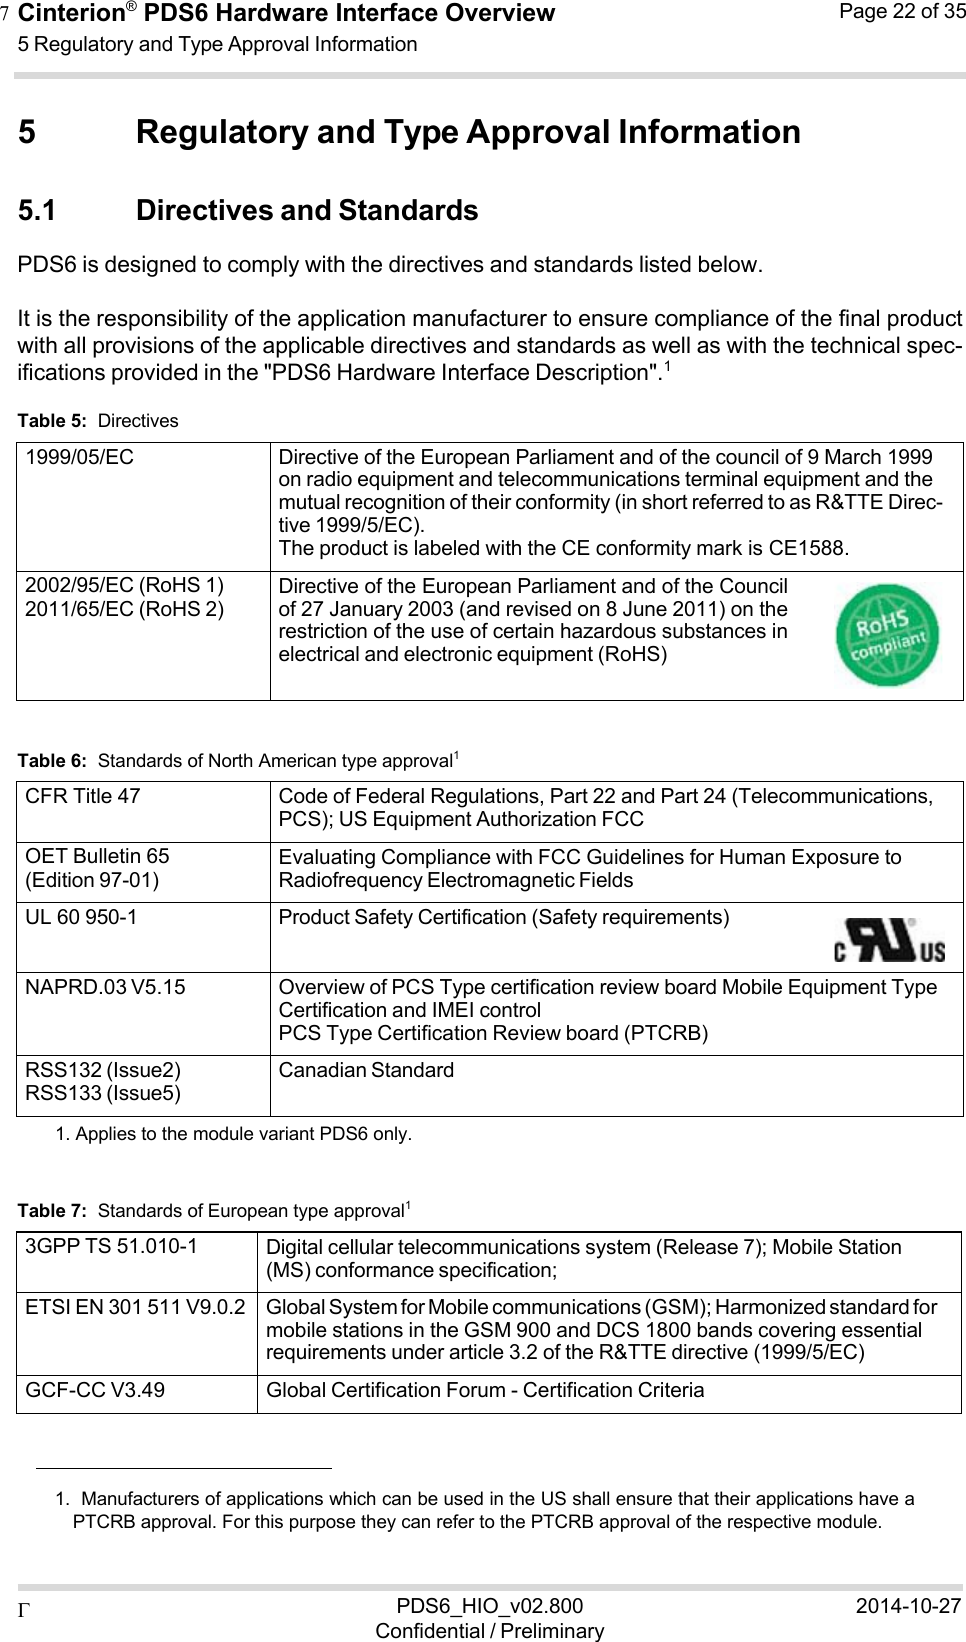 Cinterion®  PDS6 Hardware Interface Overview 5 Regulatory and Type Approval Information Page 22 of 35 PDS6_HIO_v02.800Confidential / Preliminary2014-10-27 7   5 Regulatory and Type Approval Information  5.1 Directives and Standards PDS6 is designed to comply with the directives and standards listed below.  It is the responsibility of the application manufacturer to ensure compliance of the final product with all provisions of the applicable directives and standards as well as with the technical spec- ifications provided in the &quot;PDS6 Hardware Interface Description&quot;.1  Table 5:  Directives  1999/05/EC Directive of the European Parliament and of the council of 9 March 1999 on radio equipment and telecommunications terminal equipment and the mutual recognition of their conformity (in short referred to as R&amp;TTE Direc- tive 1999/5/EC). The product is labeled with the CE conformity mark is CE1588. 2002/95/EC (RoHS 1) 2011/65/EC (RoHS 2) Directive of the European Parliament and of the Council of 27 January 2003 (and revised on 8 June 2011) on the restriction of the use of certain hazardous substances in electrical and electronic equipment (RoHS)   Table 6:  Standards of North American type approval1  CFR Title 47 Code of Federal Regulations, Part 22 and Part 24 (Telecommunications, PCS); US Equipment Authorization FCC OET Bulletin 65 (Edition 97-01) Evaluating Compliance with FCC Guidelines for Human Exposure to Radiofrequency Electromagnetic Fields UL 60 950-1 Product Safety Certification (Safety requirements)NAPRD.03 V5.15 Overview of PCS Type certification review board Mobile Equipment Type Certification and IMEI control PCS Type Certification Review board (PTCRB) RSS132 (Issue2) RSS133 (Issue5) Canadian Standard1. Applies to the module variant PDS6 only.   Table 7:  Standards of European type approval1  3GPP TS 51.010-1 Digital cellular telecommunications system (Release 7); Mobile Station (MS) conformance specification; ETSI EN 301 511 V9.0.2 Global System for Mobile communications (GSM); Harmonized standard for mobile stations in the GSM 900 and DCS 1800 bands covering essential requirements under article 3.2 of the R&amp;TTE directive (1999/5/EC) GCF-CC V3.49 Global Certification Forum - Certification Criteria    1.  Manufacturers of applications which can be used in the US shall ensure that their applications have a PTCRB approval. For this purpose they can refer to the PTCRB approval of the respective module. 